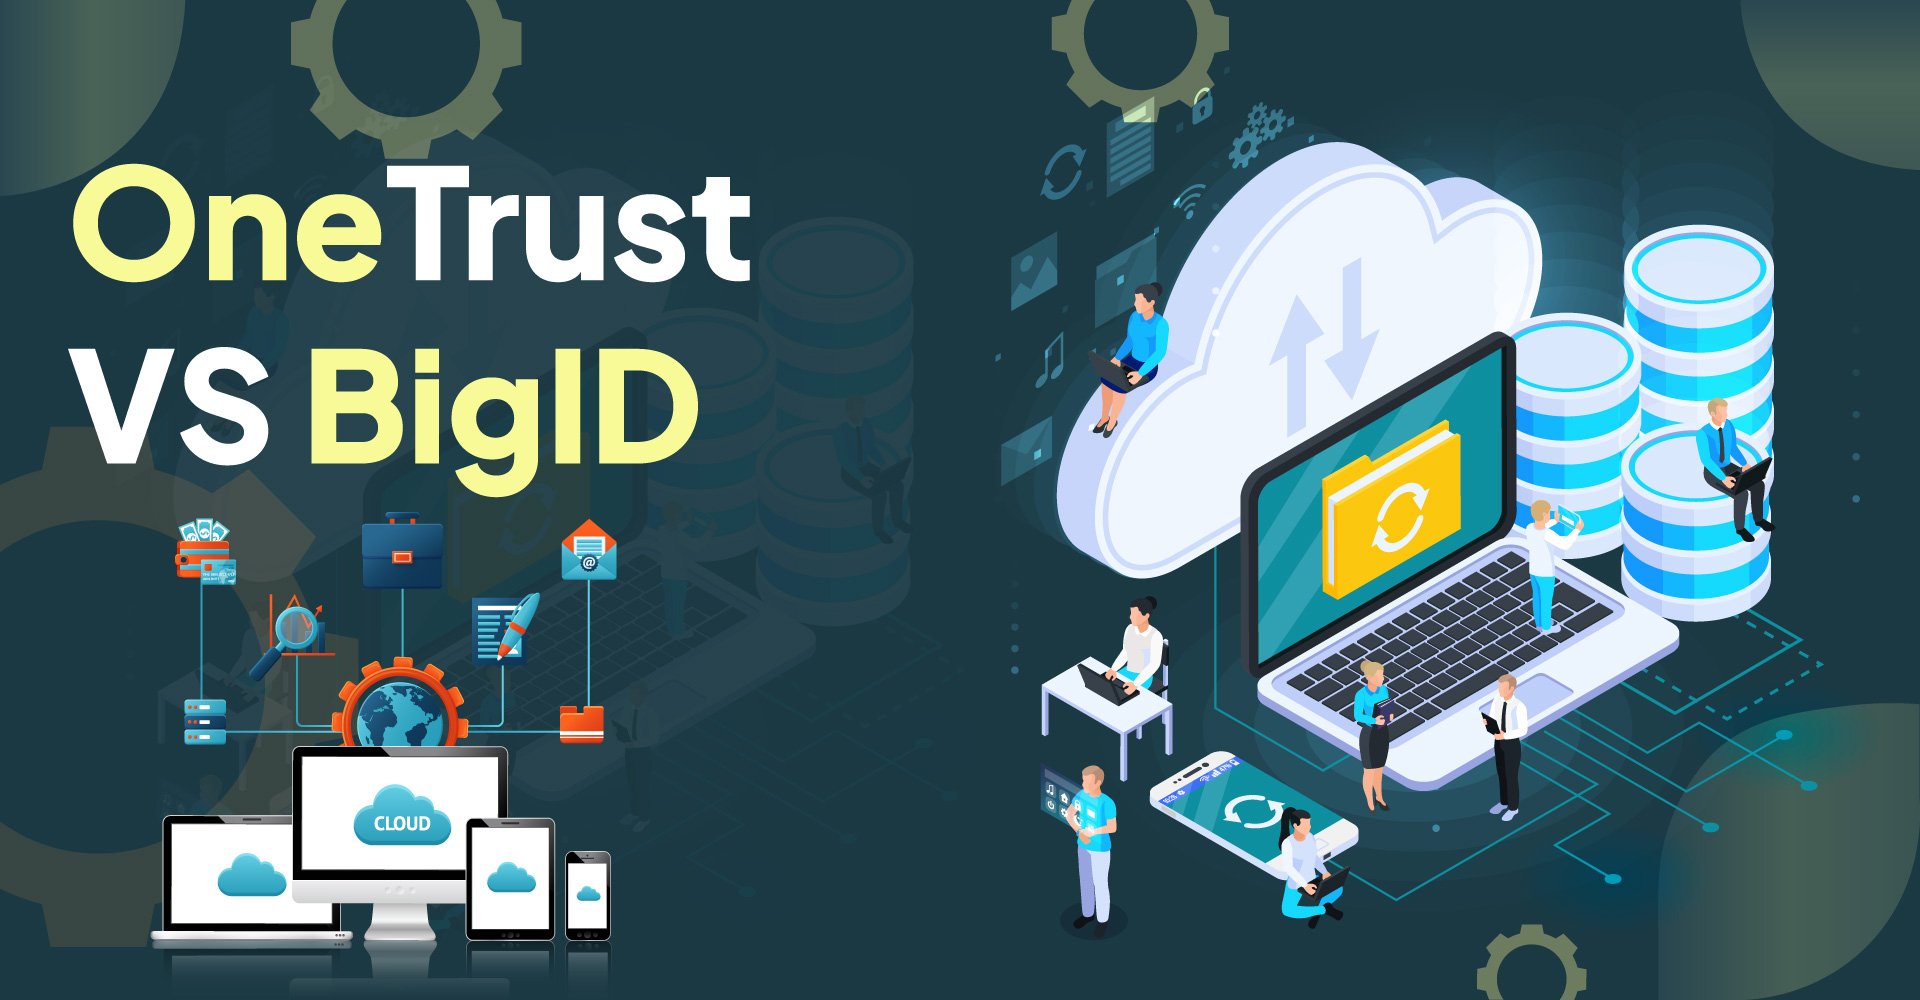 Introducing the OneTrust Privacy & Data Governance Cloud 